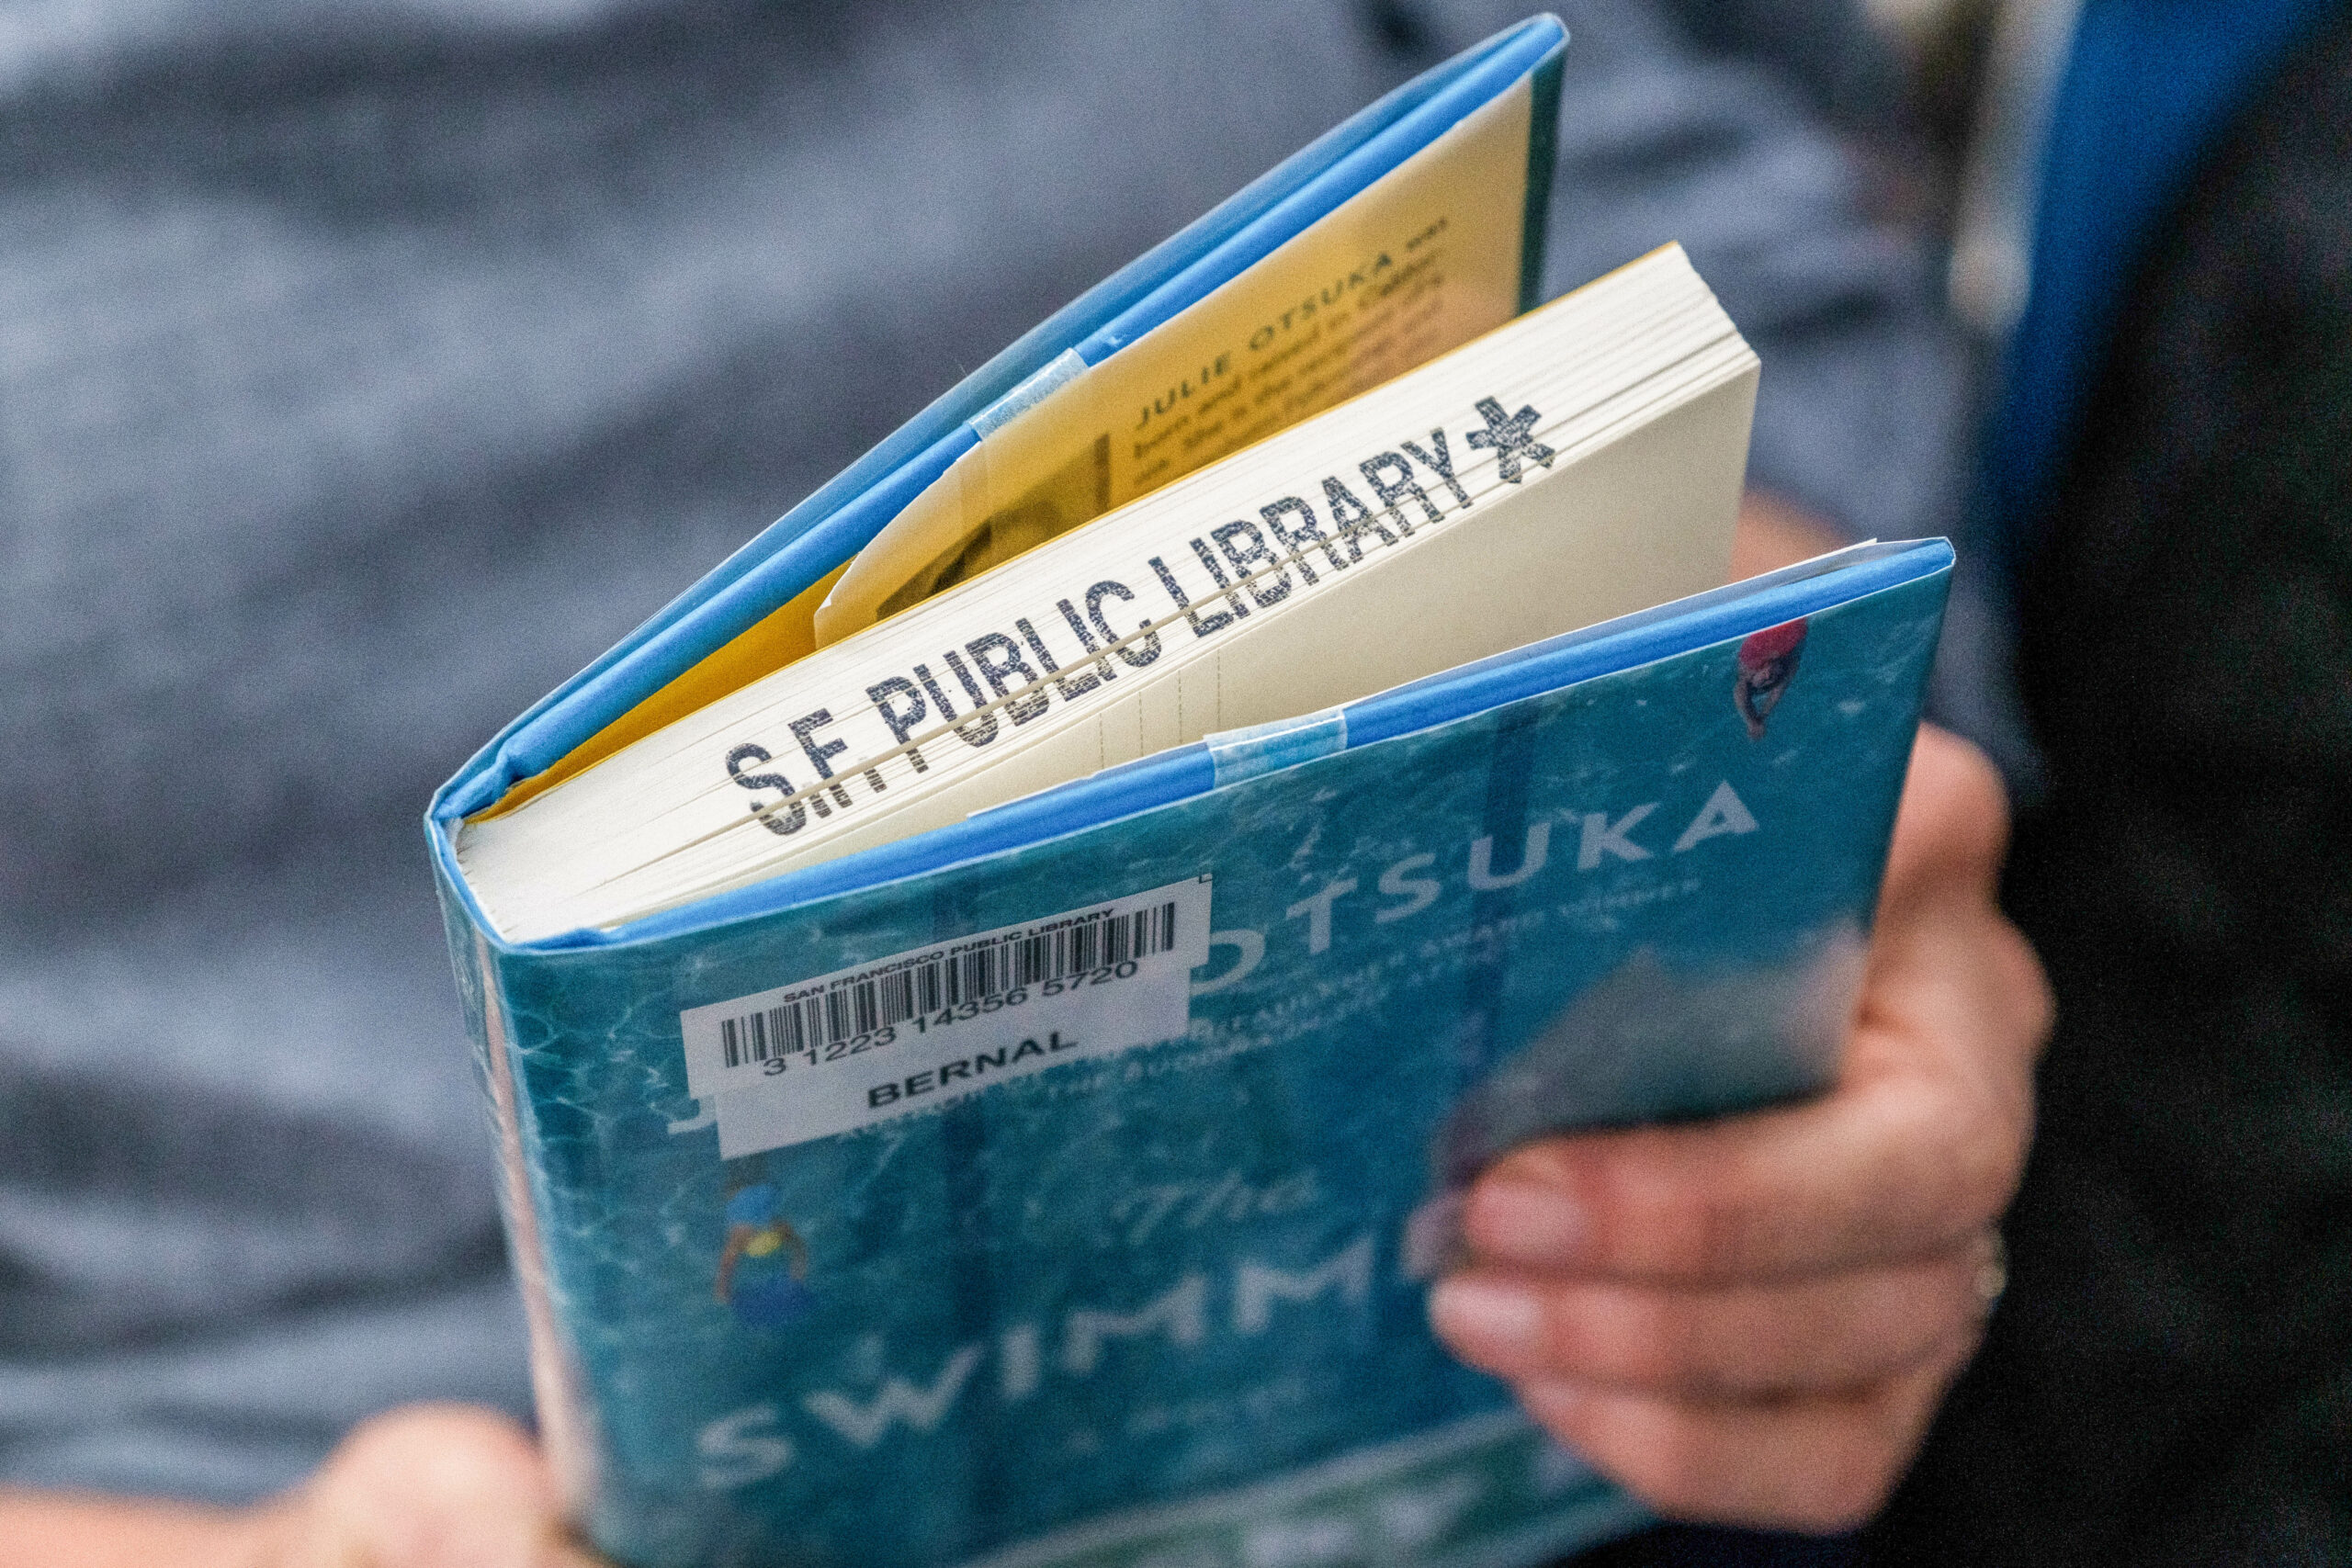 A person holds a book with "S.F. Public Library" stamped on it.